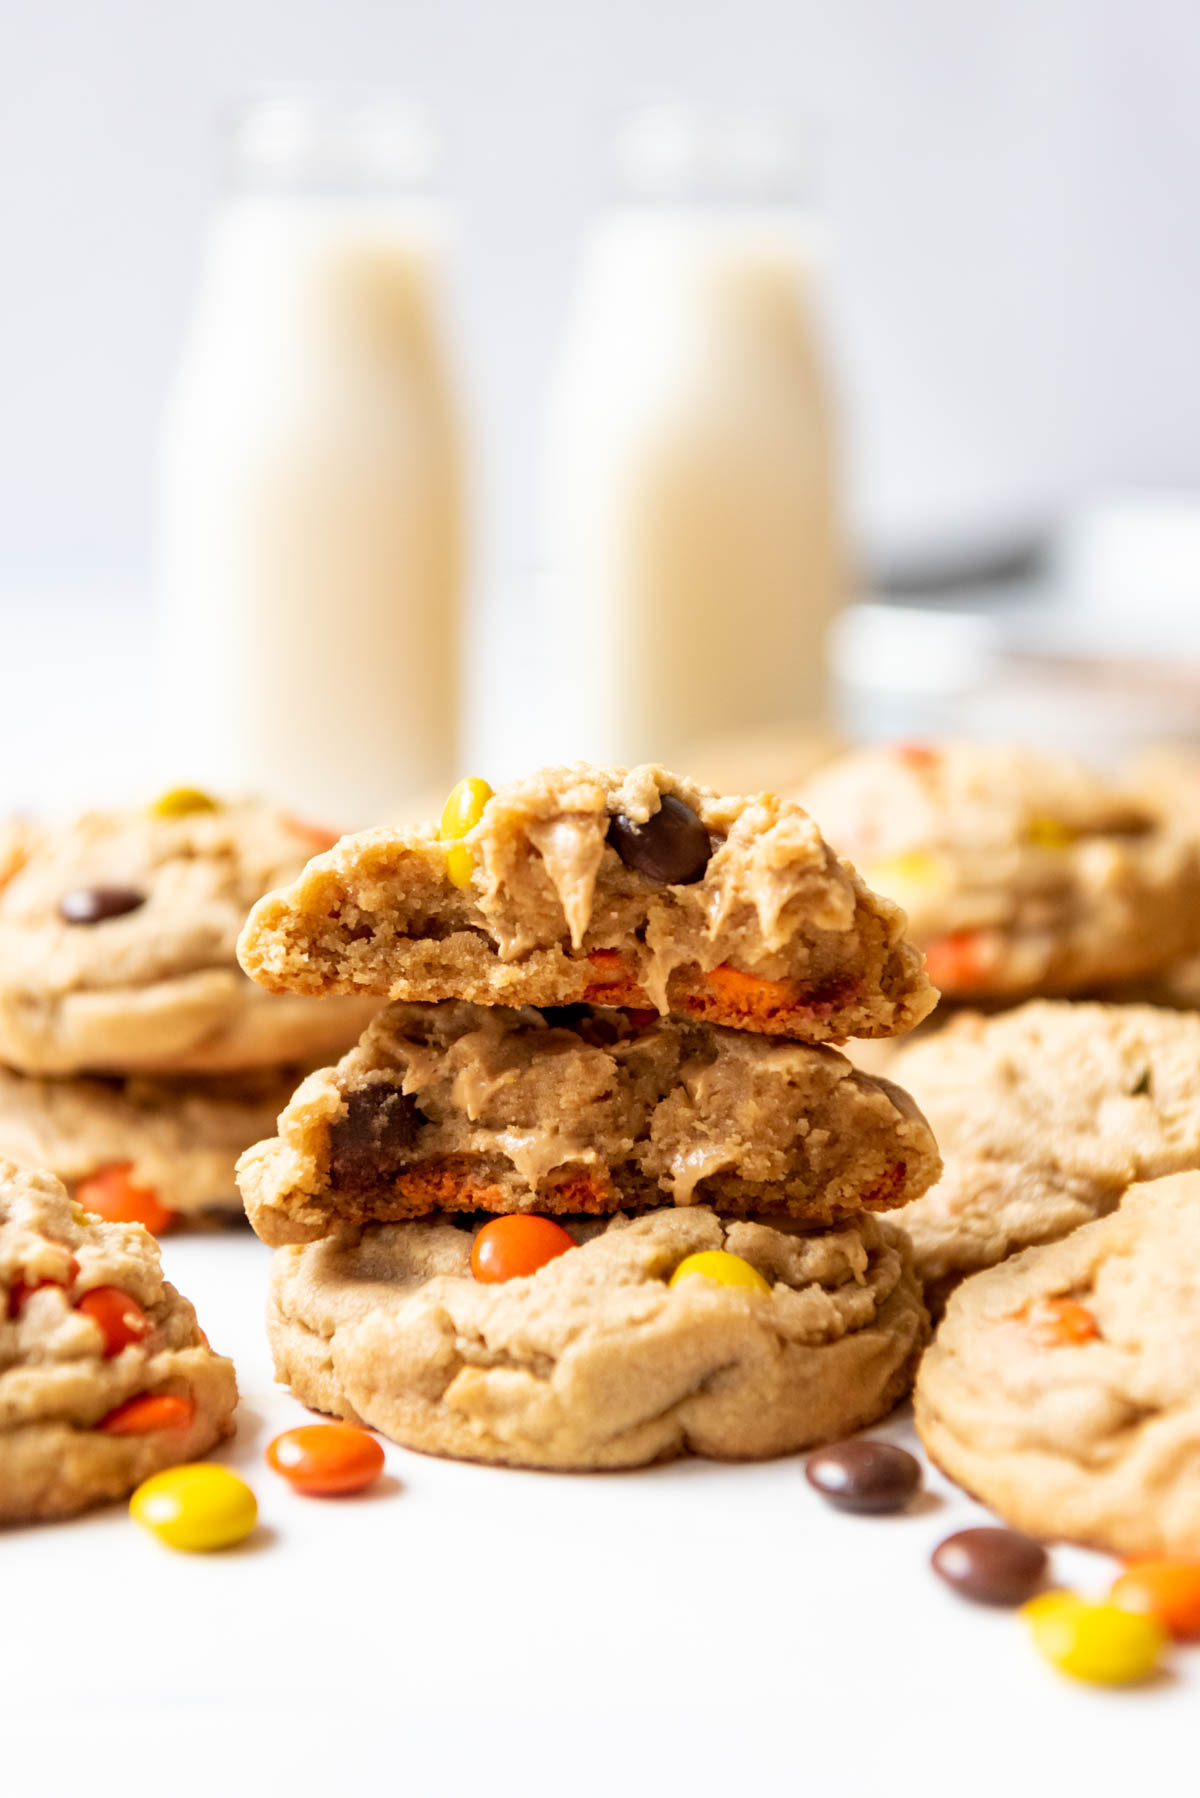 A Reese's Pieces cookie that has been broken in half and stacked on top of another cookie with two glasses of milk in the background.